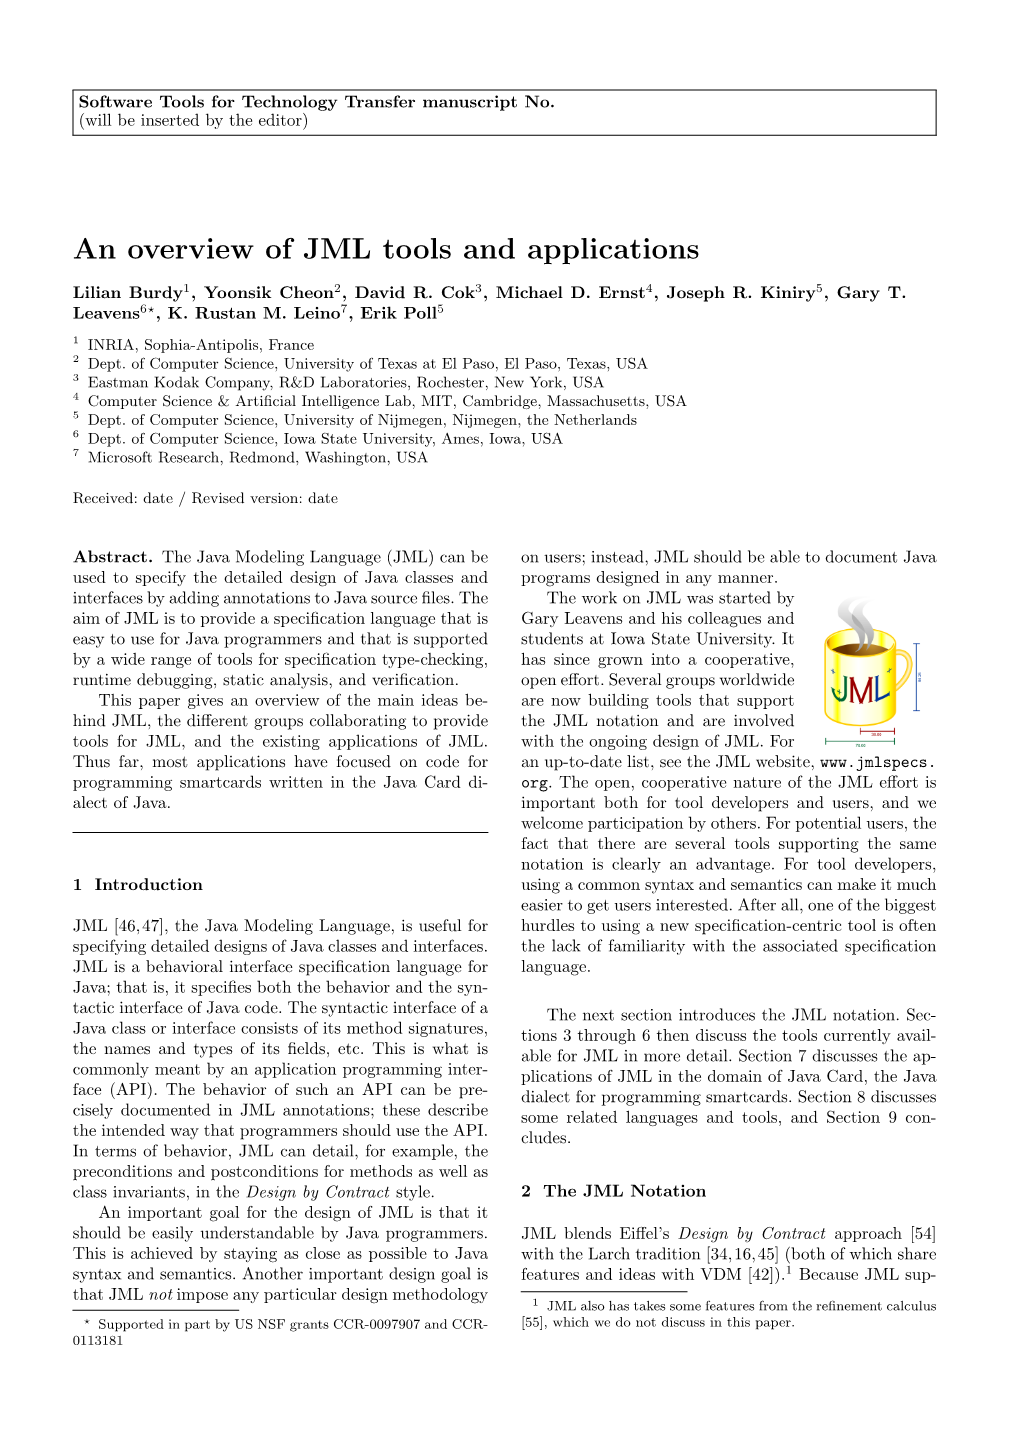 An Overview of JML Tools and Applications